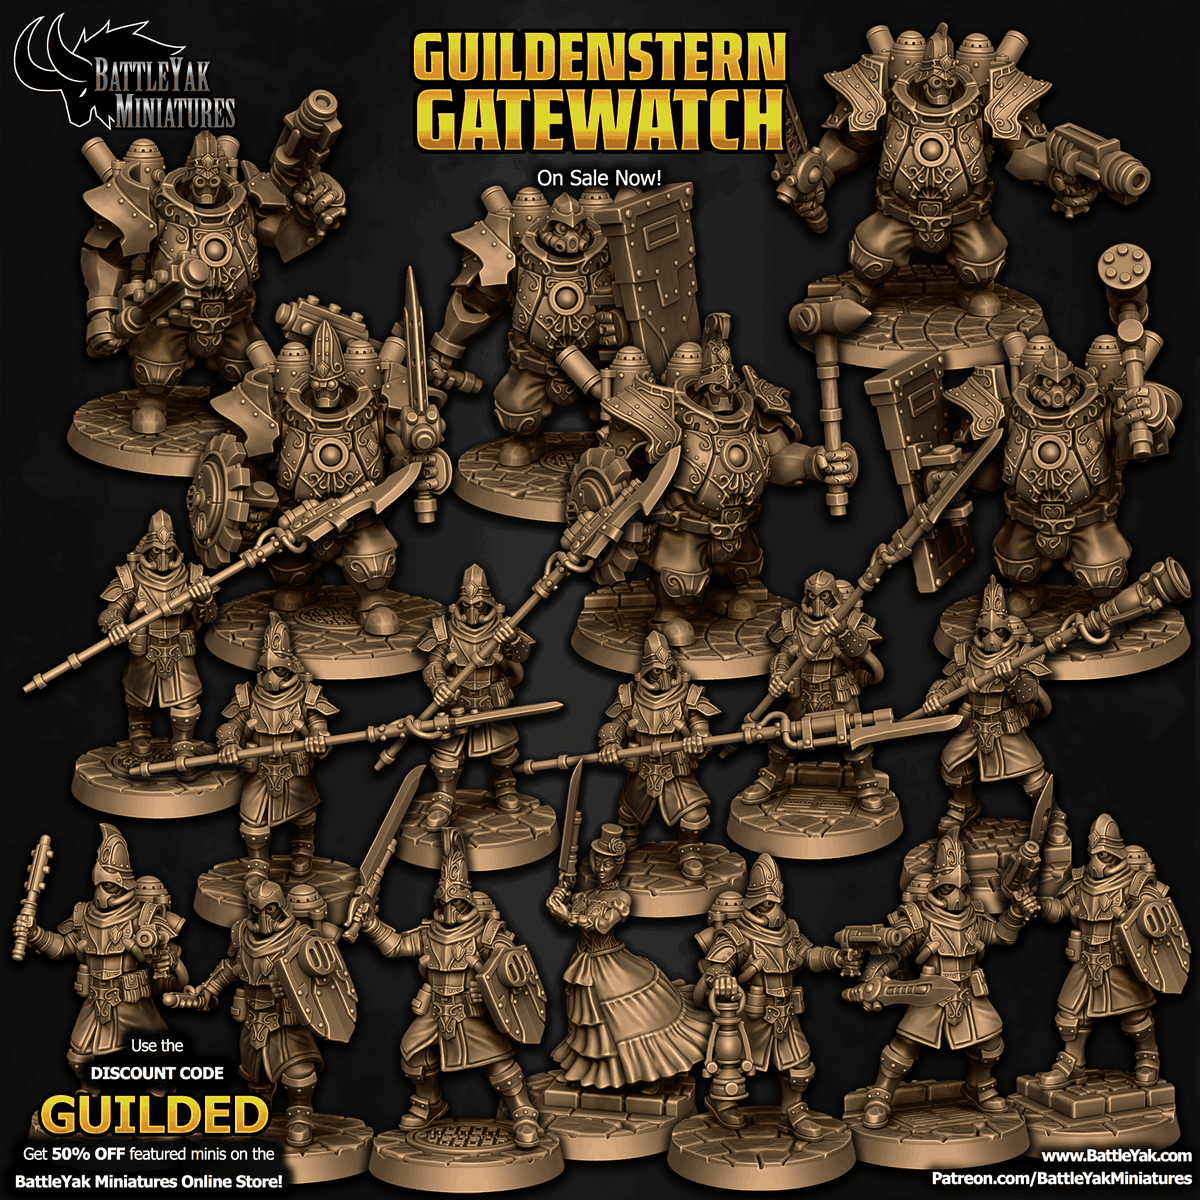 The latest sale from Battle Yak Miniatures is available now! battleyak.com #3dprinting #tabletopgaming #warcraft #conceptart #watchman #golem #dnd #wargaming